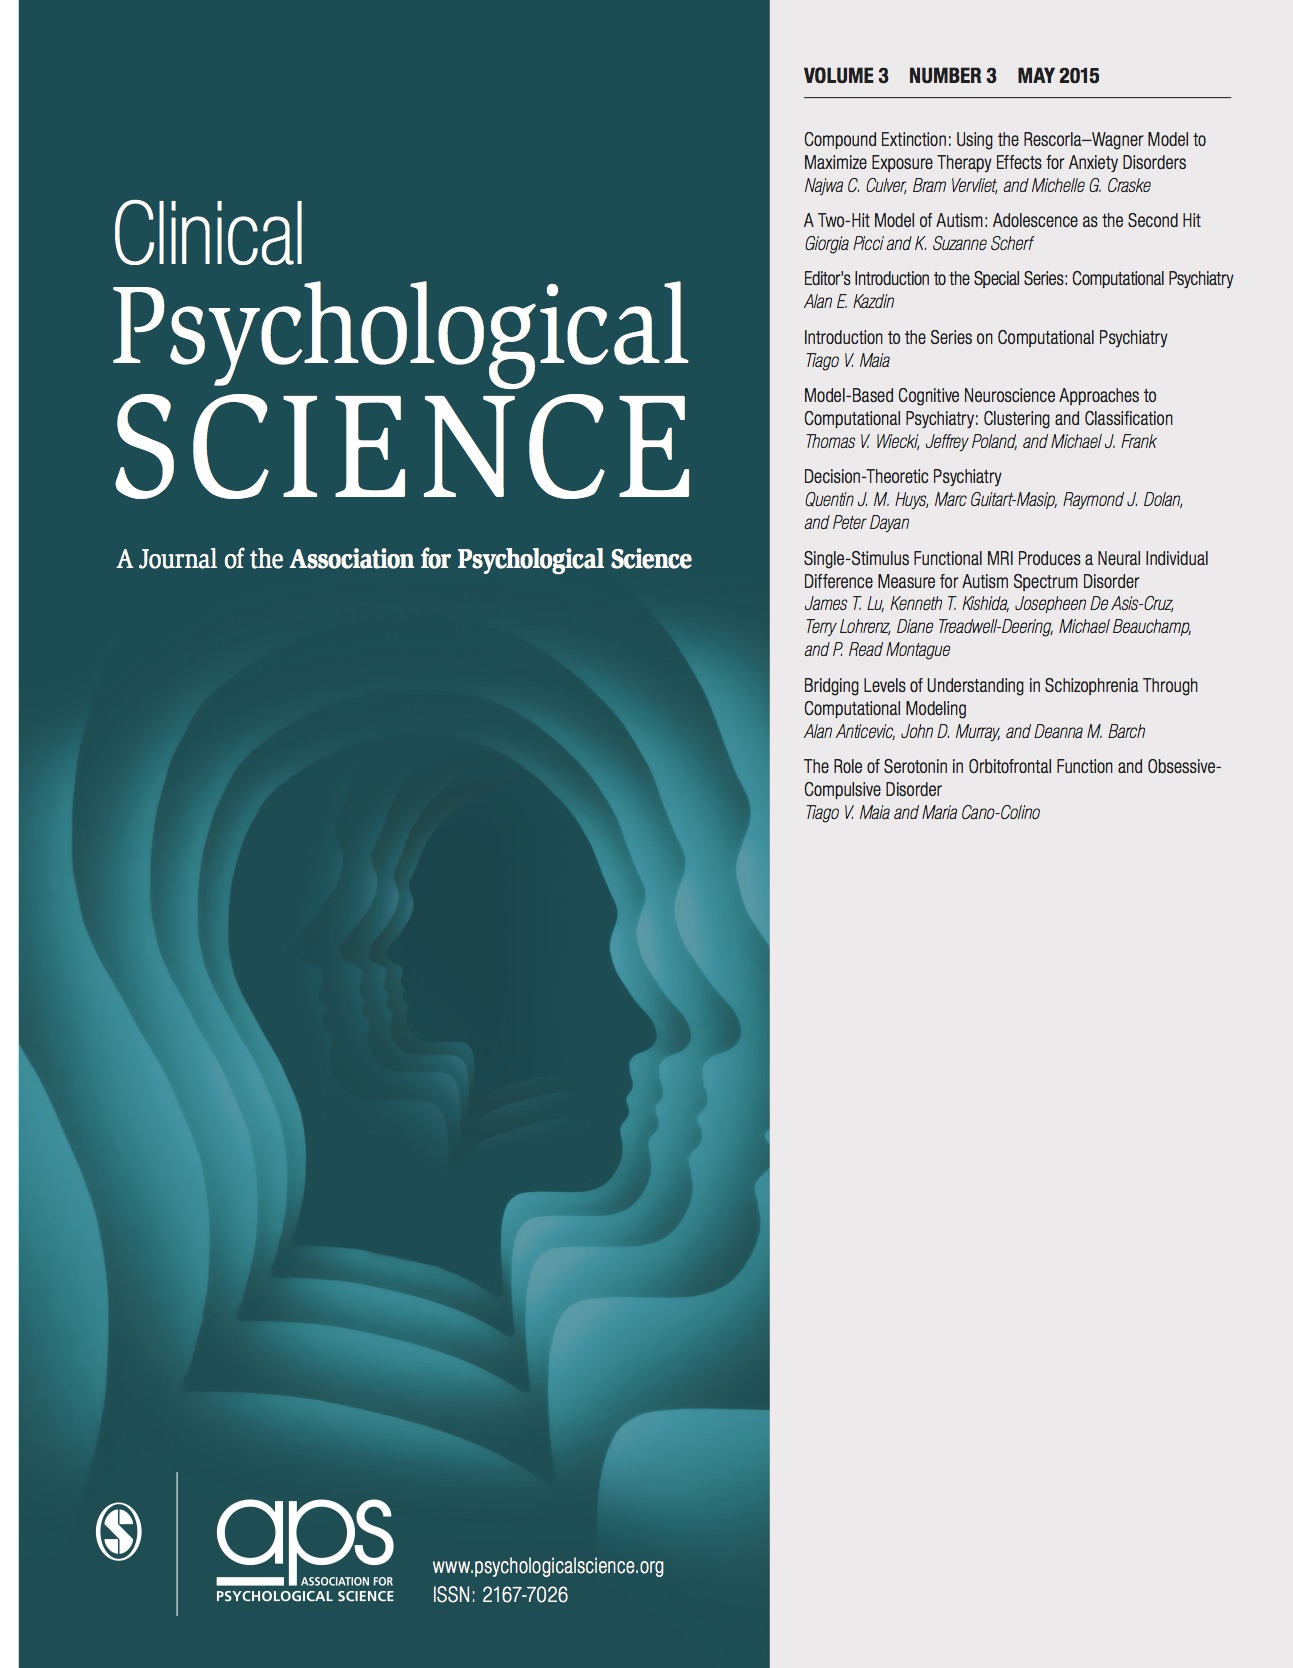 Clin Psych Science special issue